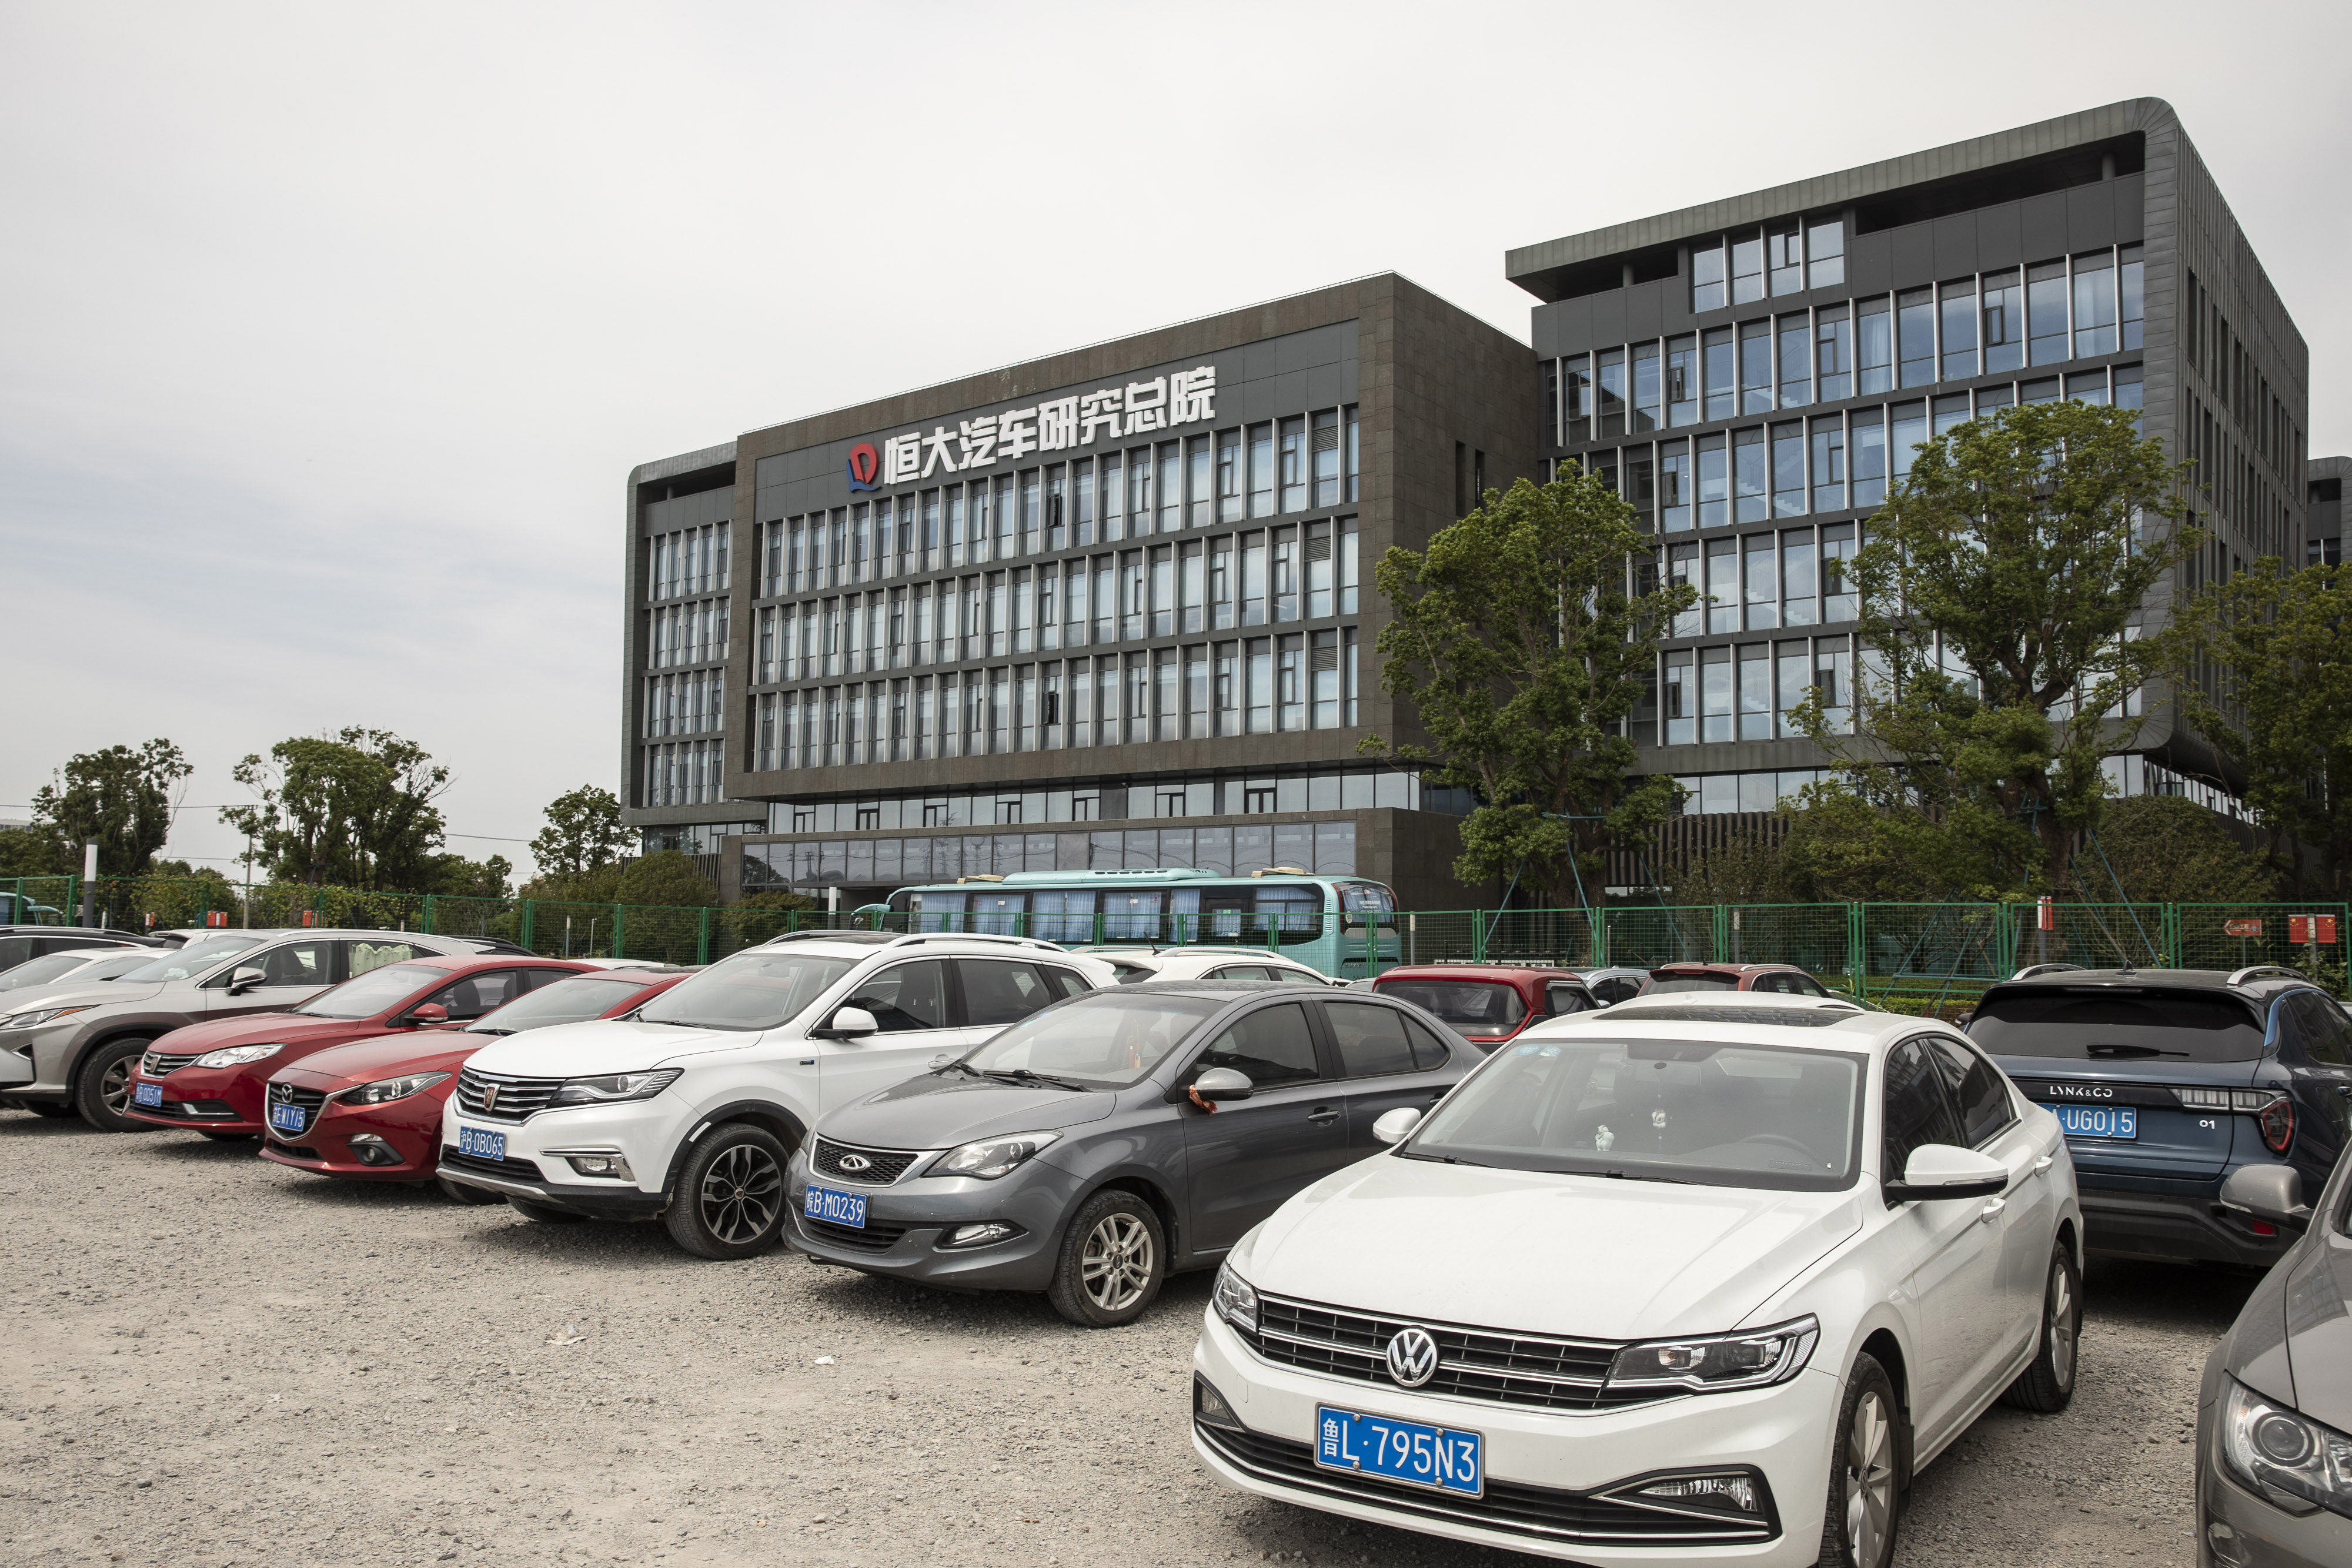 China Evergrande New Energy Vehicle Group’s research headquarters in Shanghai, seen in September 2021. Photo: Bloomberg